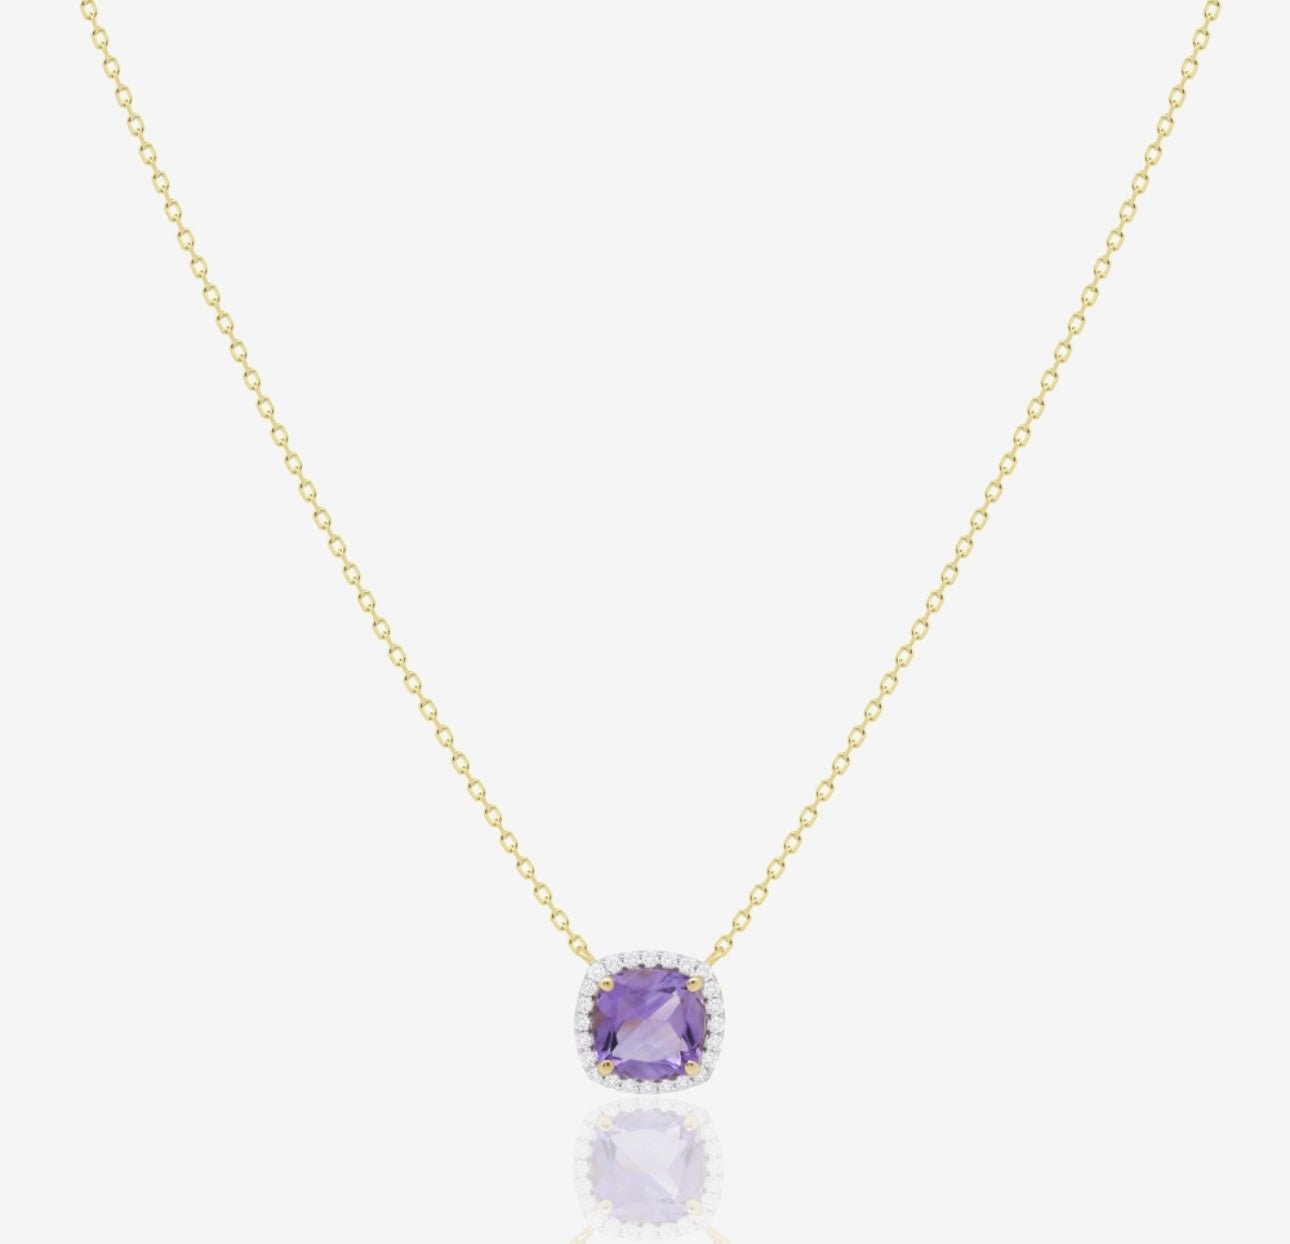 Iris Necklace in Diamond and Amethyst - 18k Gold - Ly